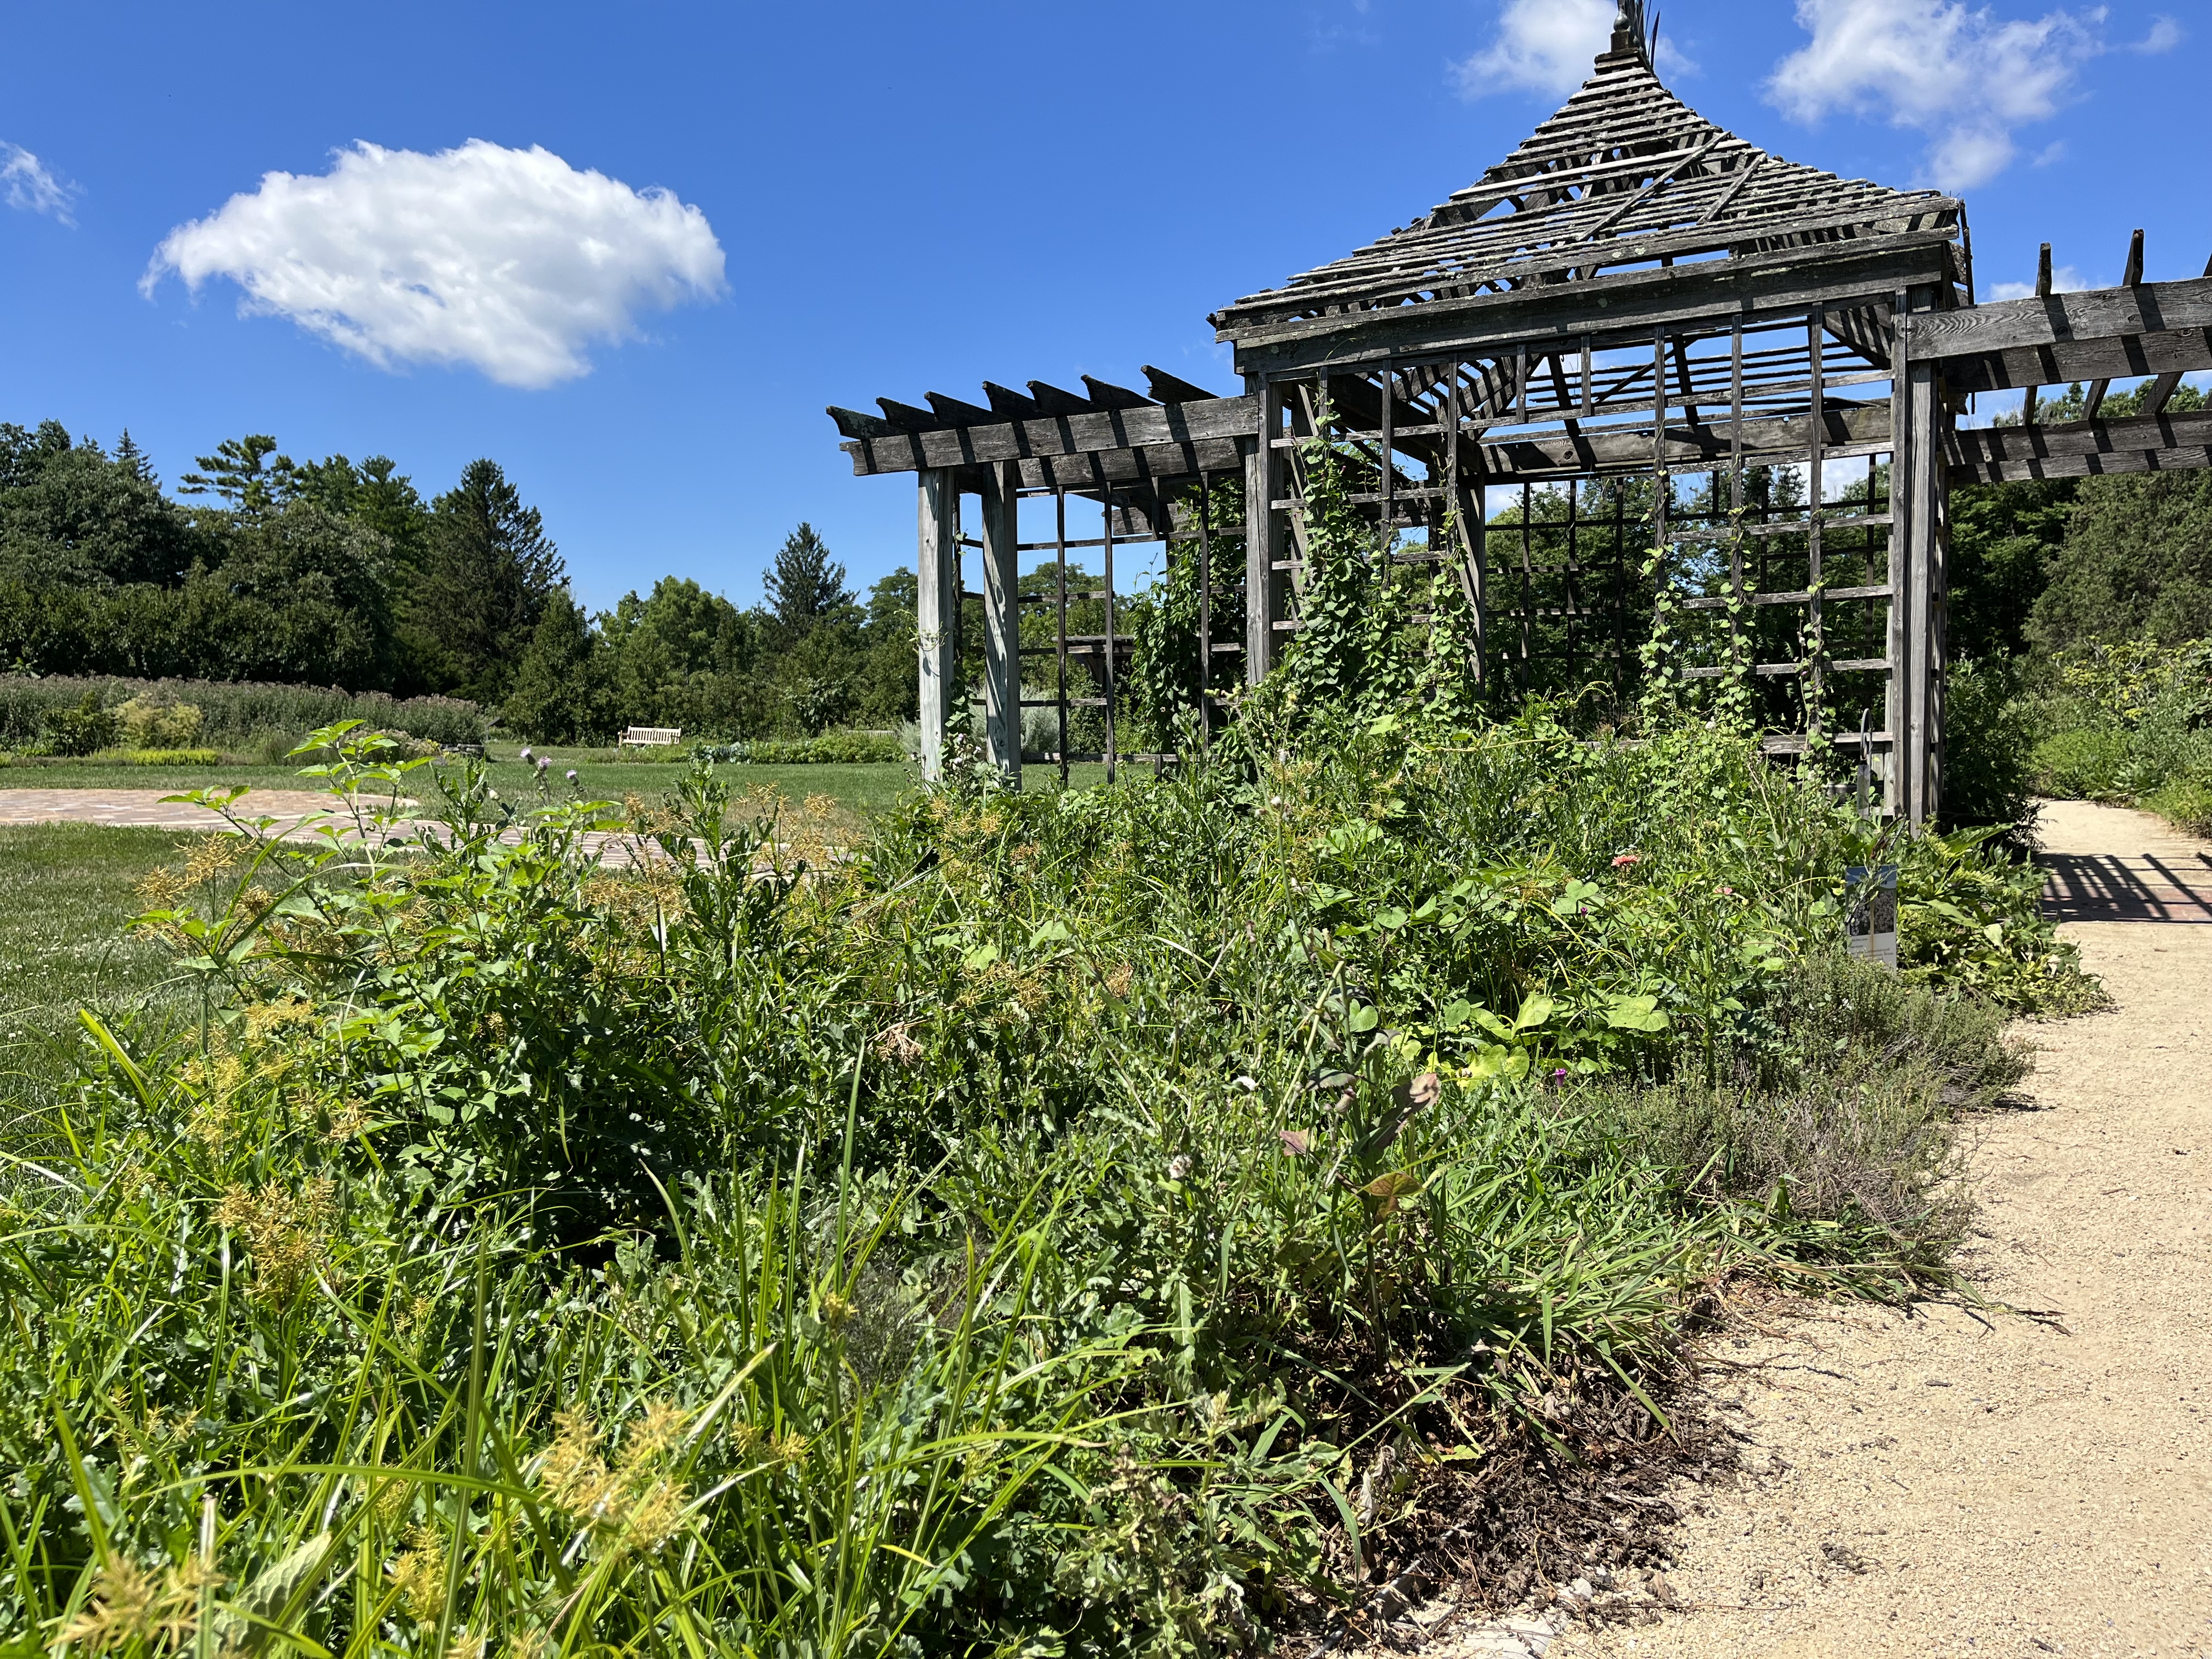 Garden at Cox Arboretum in rough shape as family and others blame a lack of volunteers